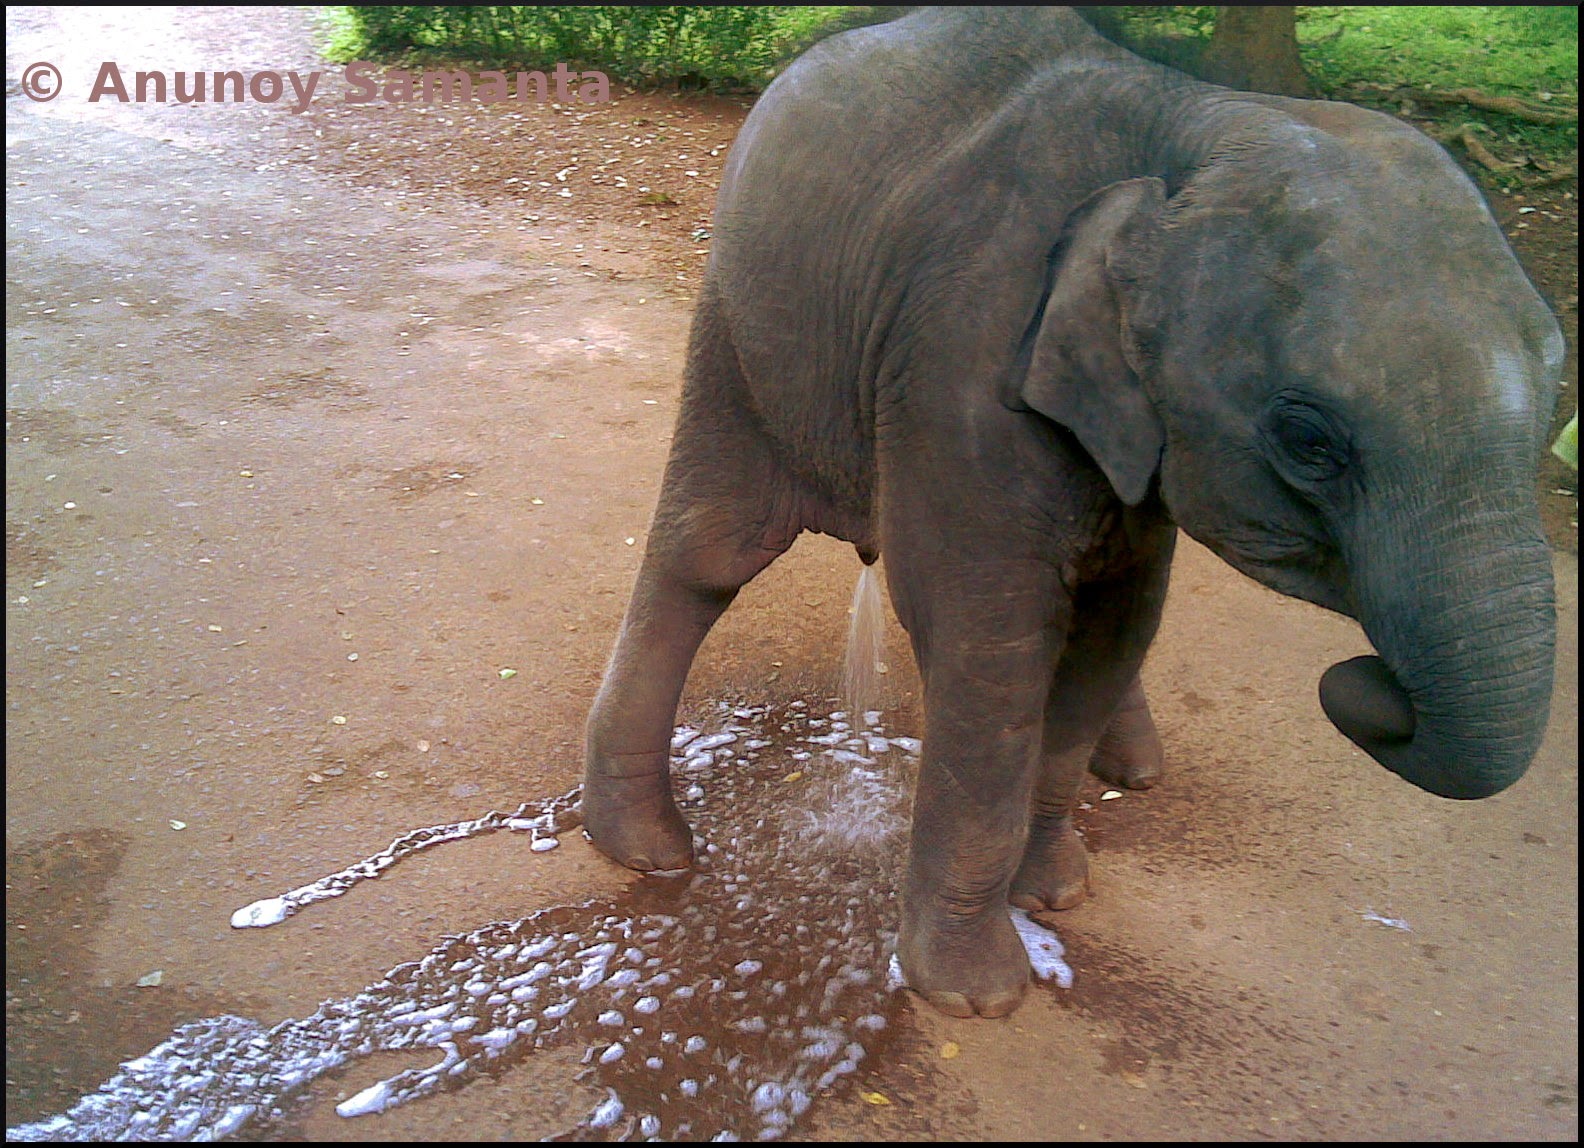 Collecting Semen From An Elephant (nsfw)